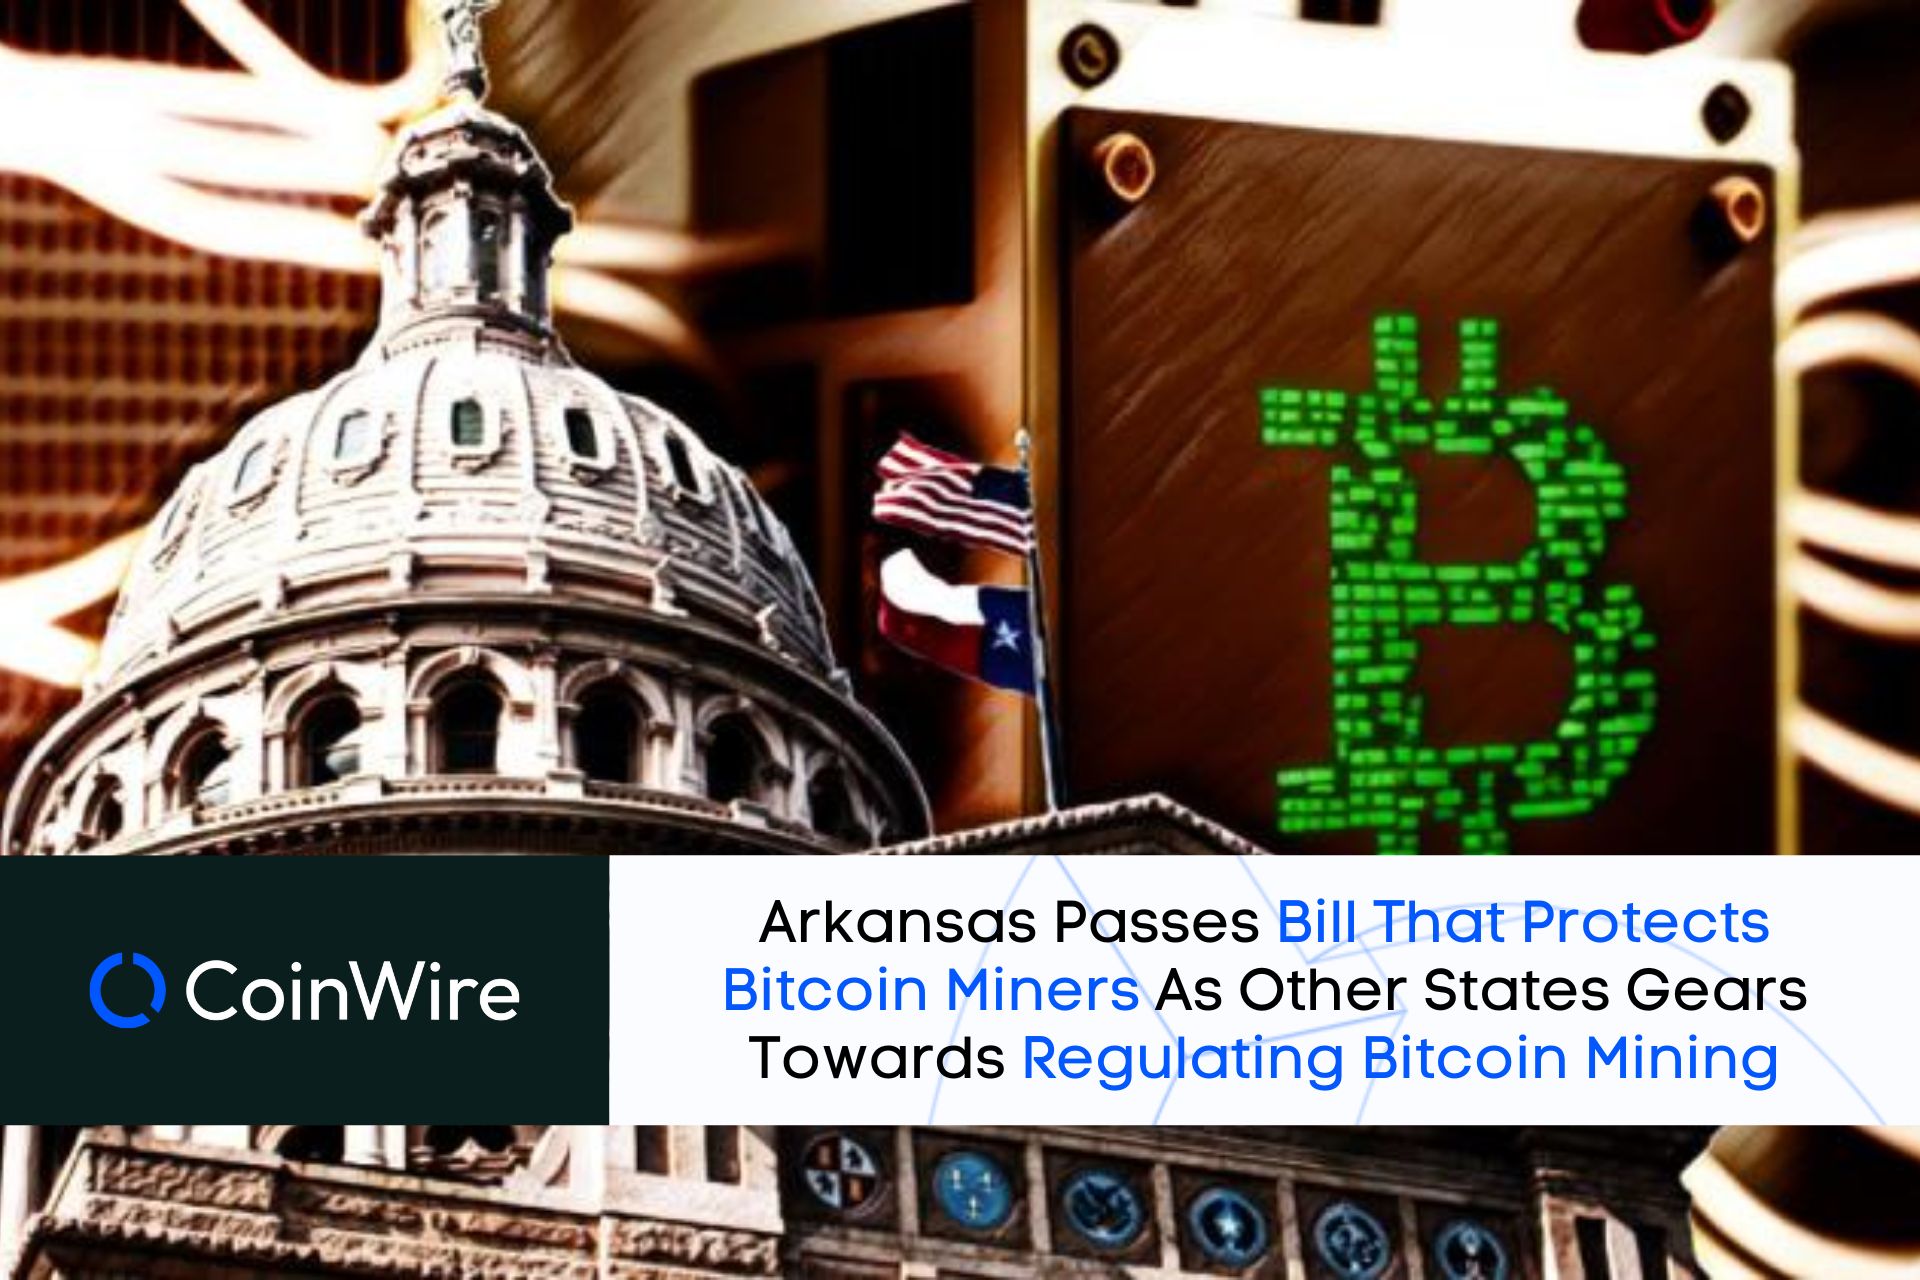 Arkansas Passes Bill That Protects Bitcoin Miners As Other States Gears Towards Regulating Bitcoin Mining